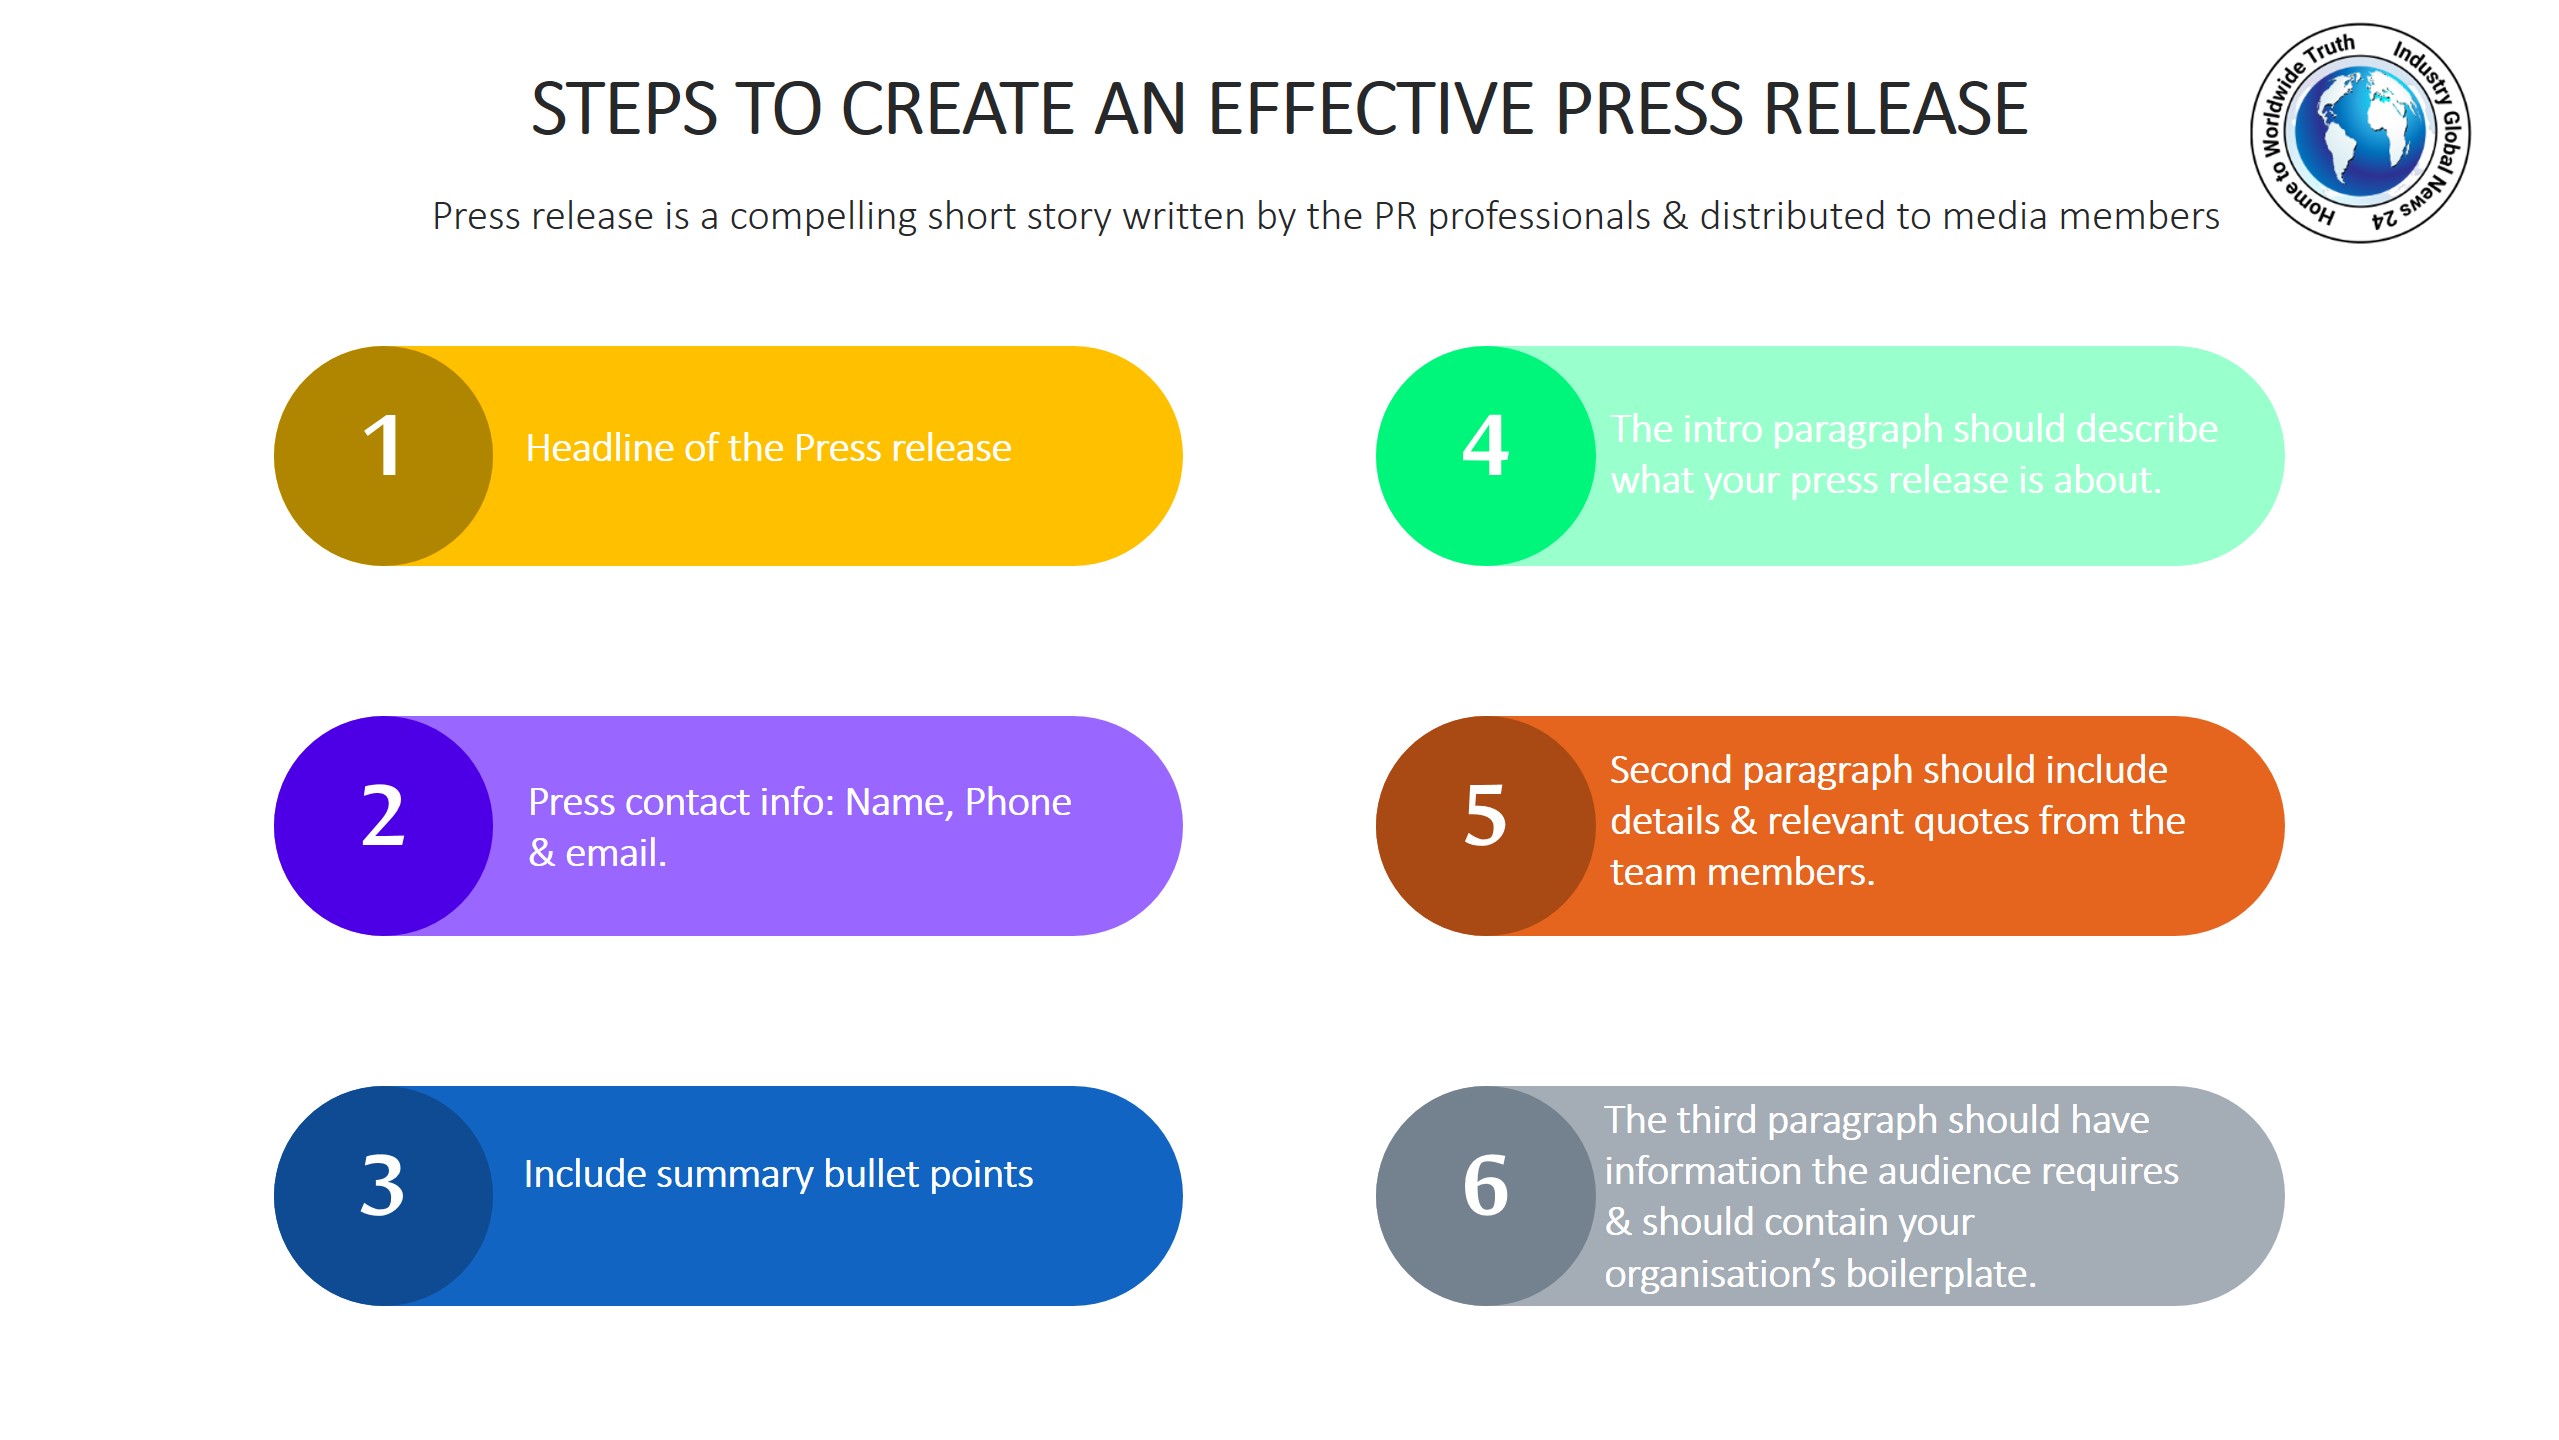 Steps to create an effective press release